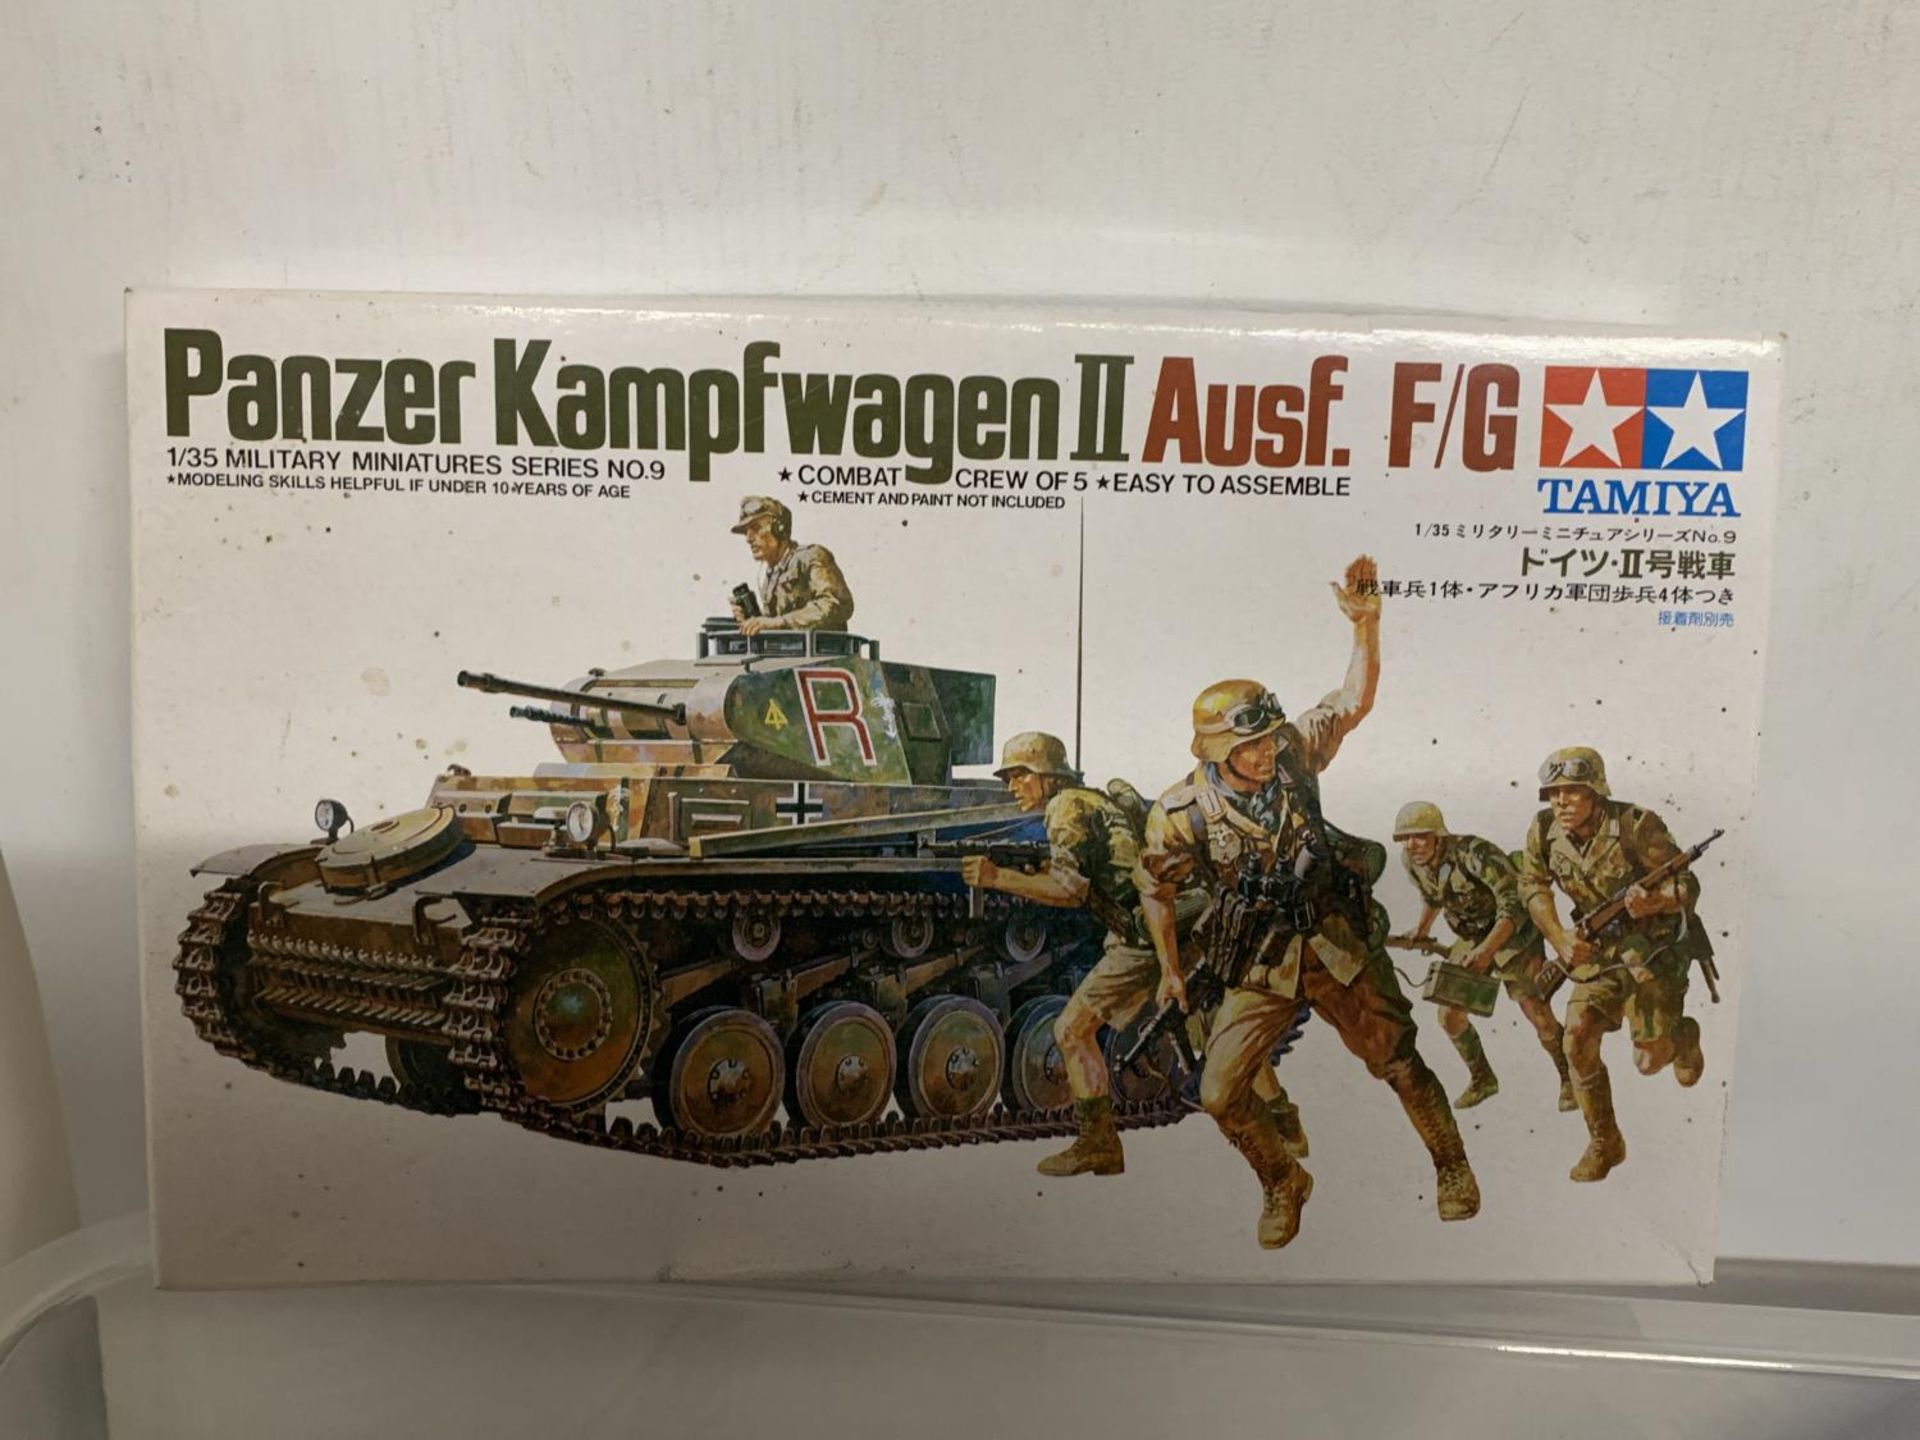 A QUANTITY OF MIITARY PRECISION MODEL KITS TO INCLUDE US GUN AND MORTAR TEAM, GERMAN PANZER - Image 3 of 4